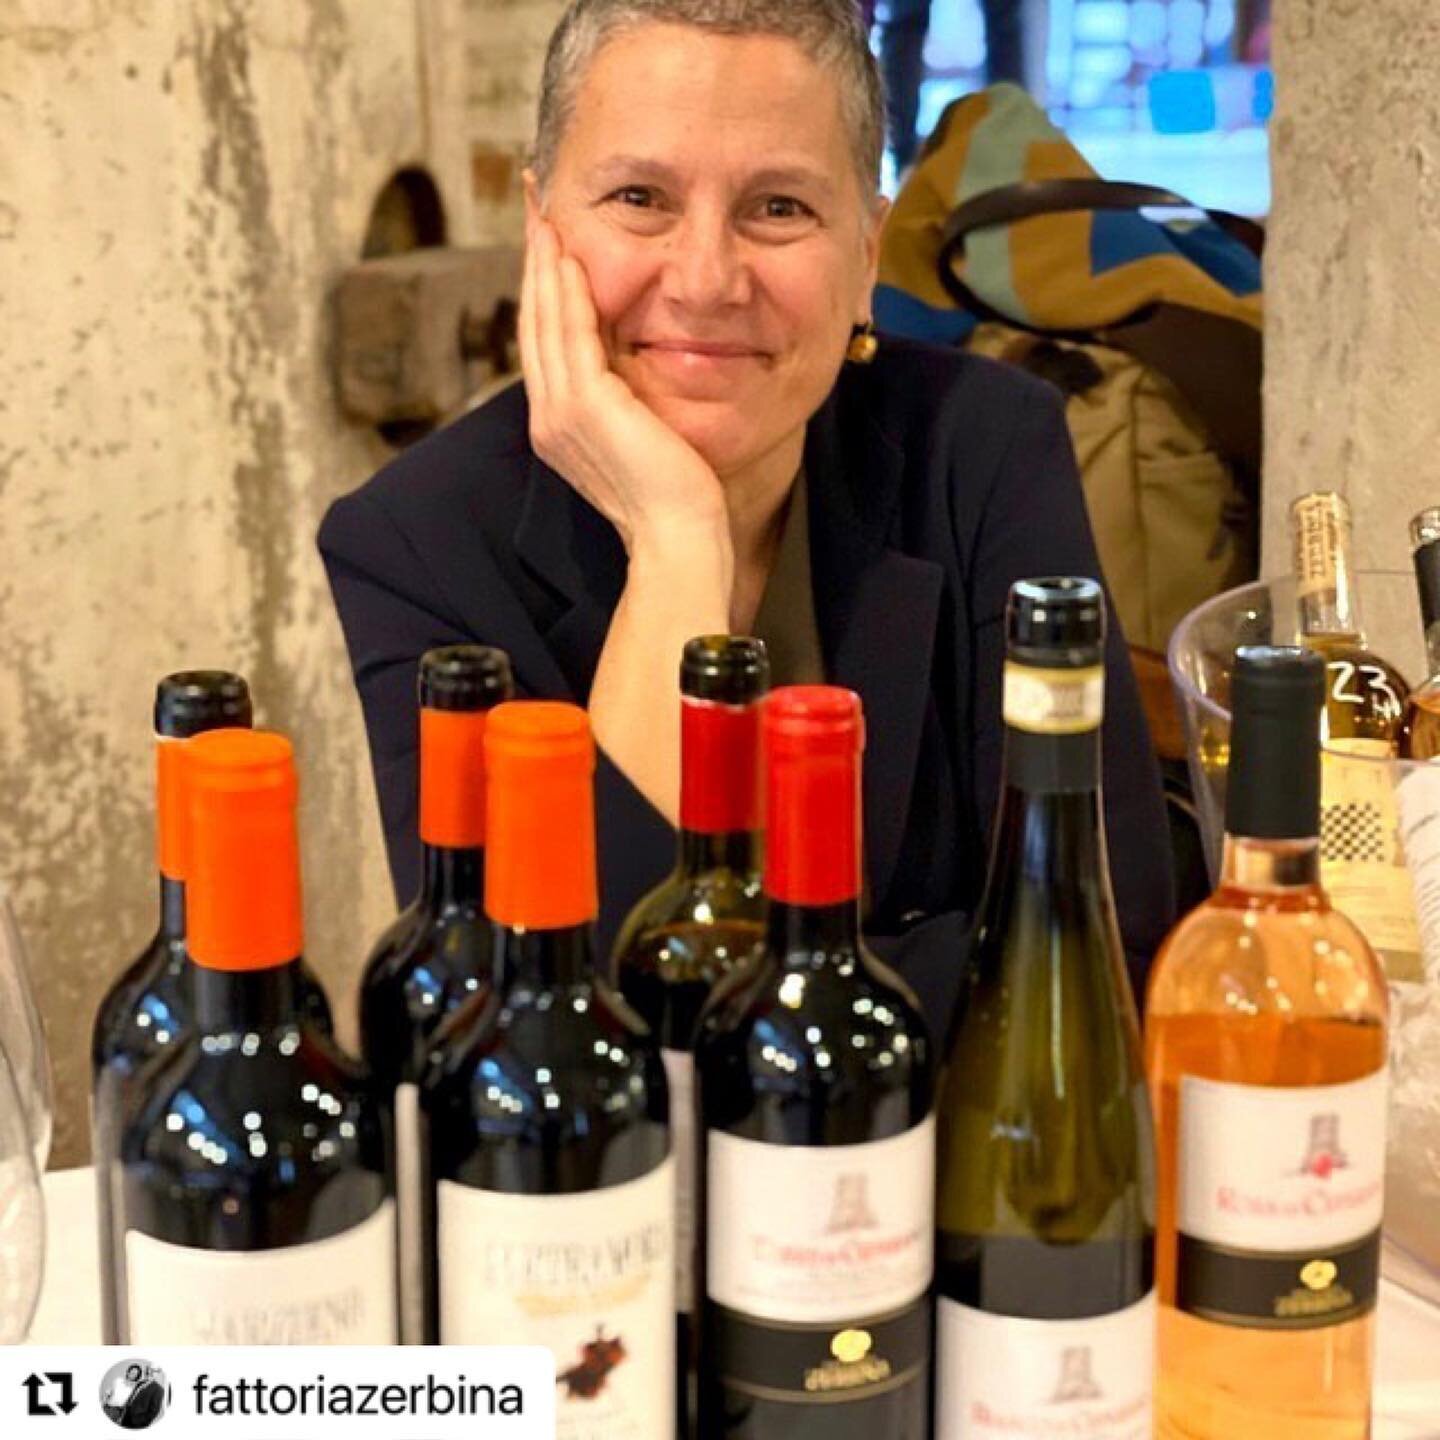 #Repost @fattoriazerbina with @make_repost
・・・
Almost ready for Vinitaly 2022! 

We can&rsquo;t wait to meet you to taste the latest new vintages and tell you new vineyards stories!

See you at Pavilion 7 stand E3 ☺️